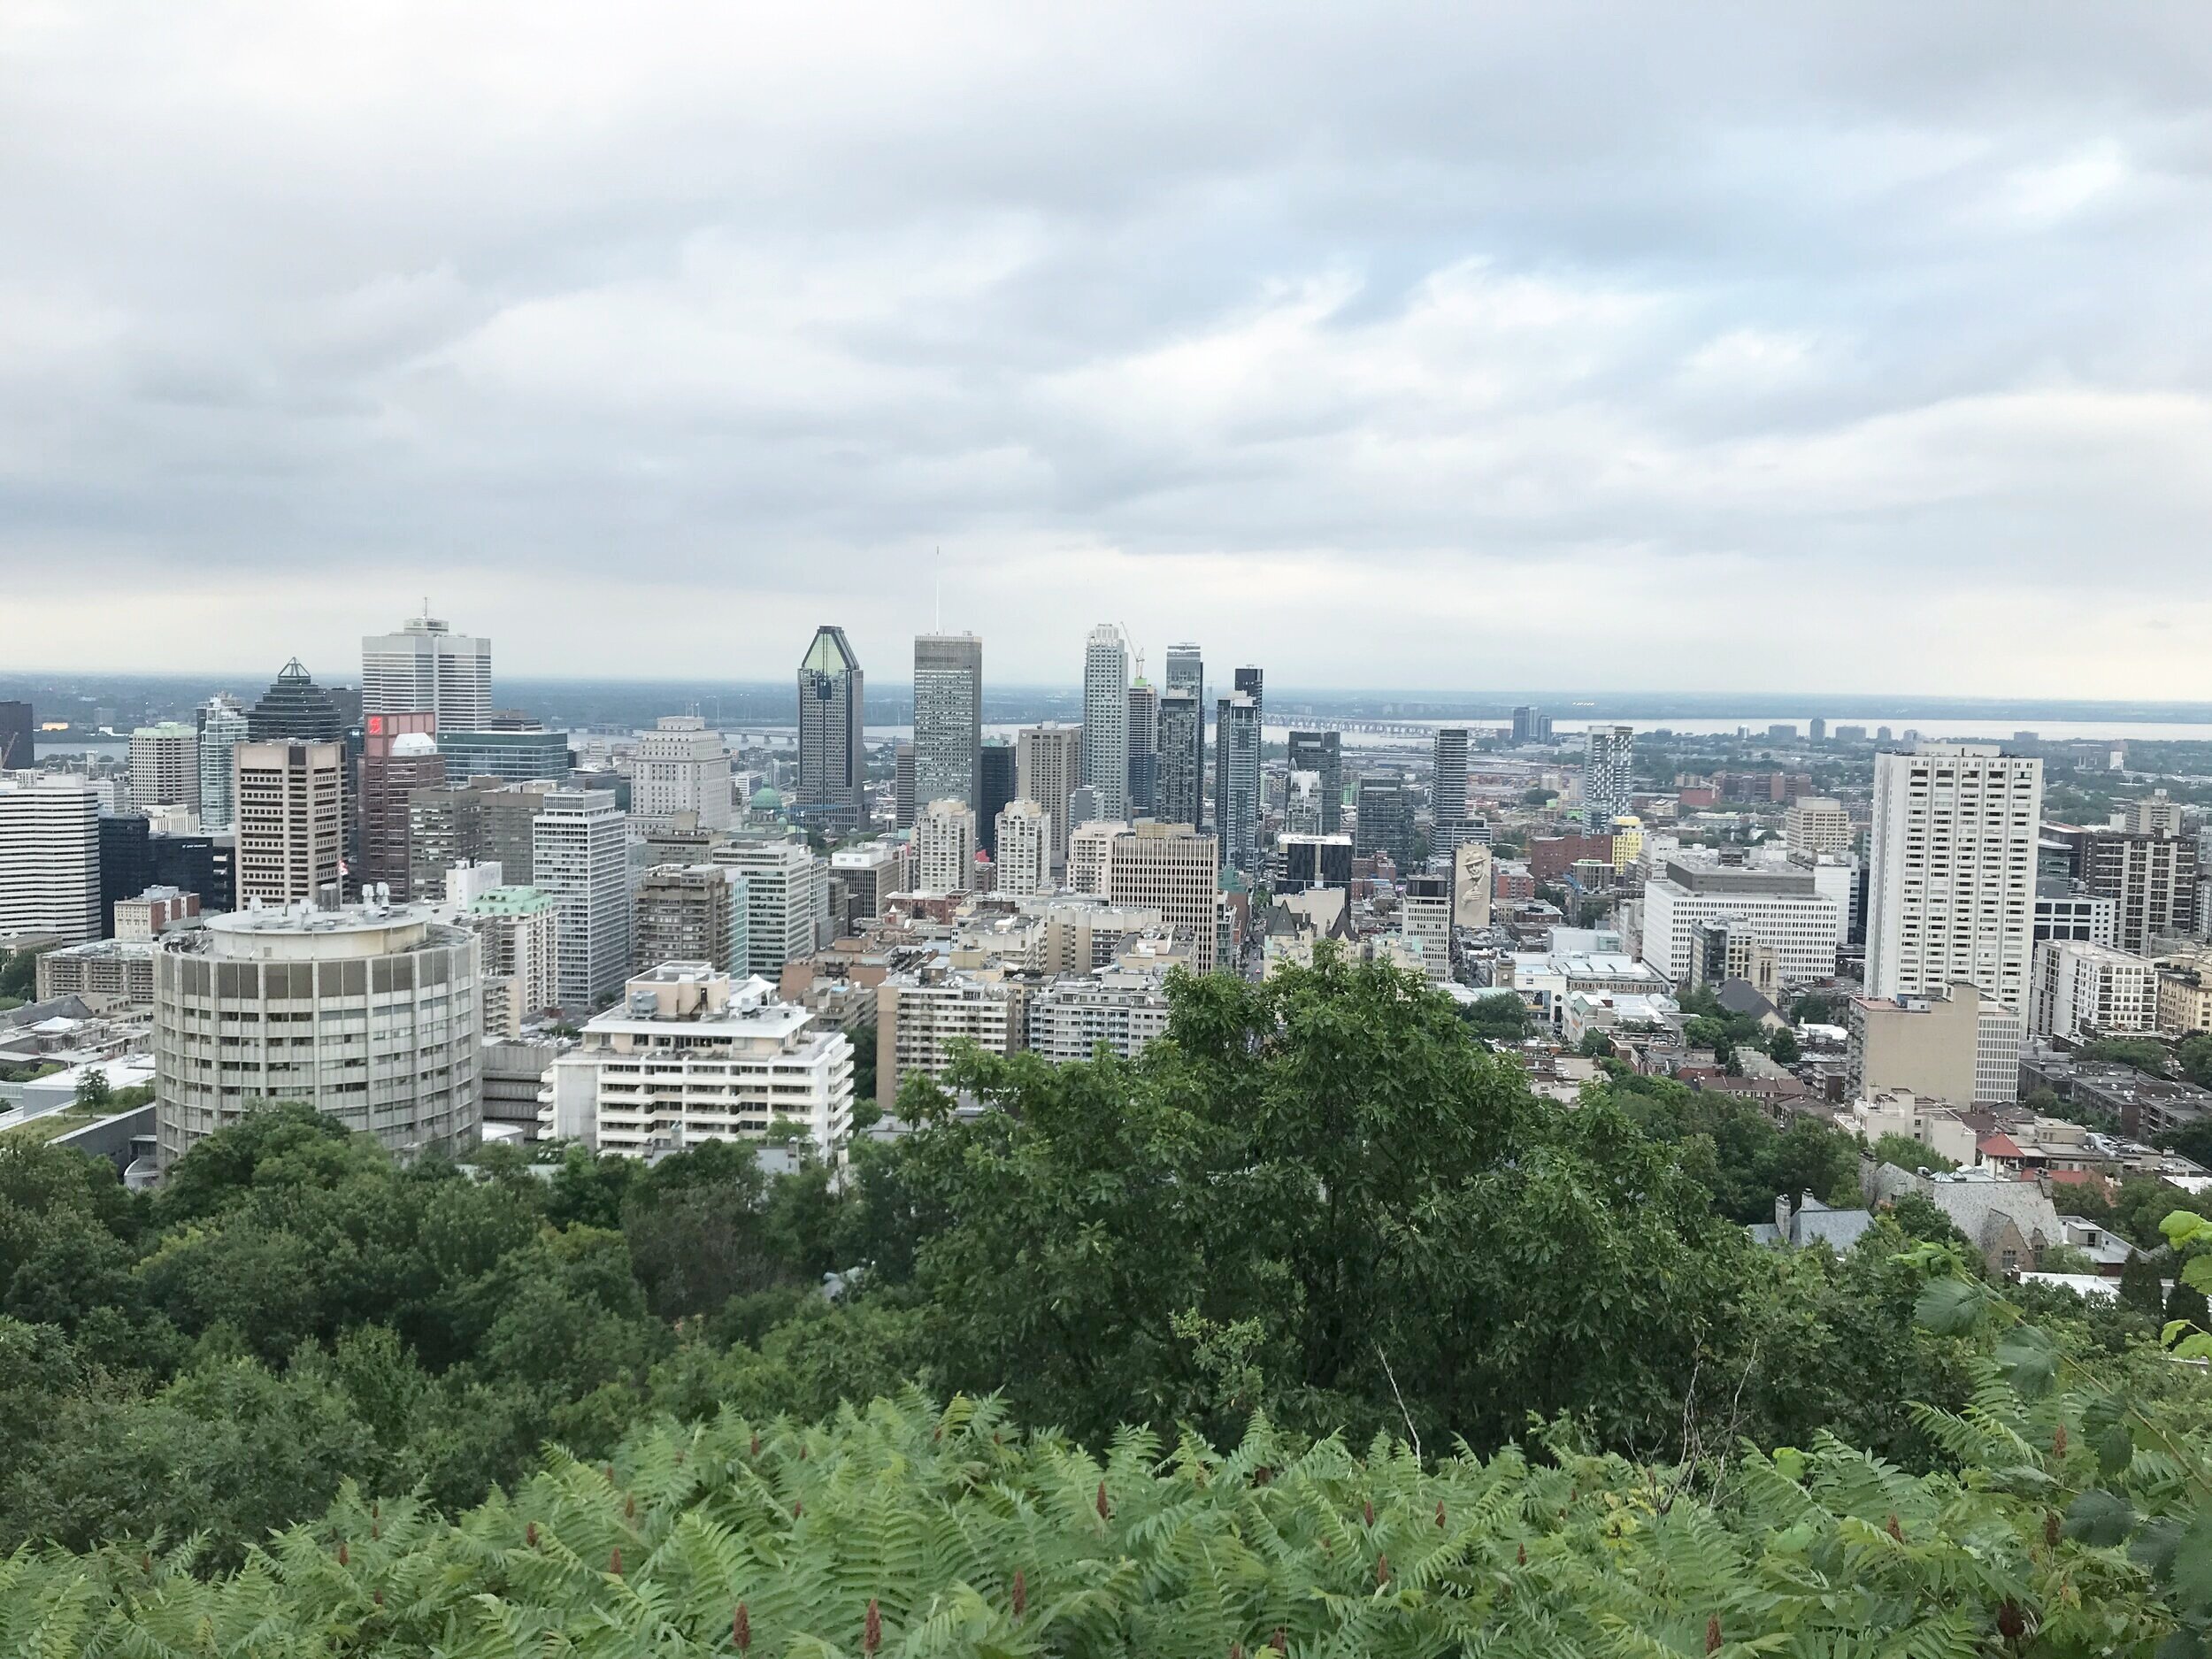 Check out the skyline of Montreal, Canada